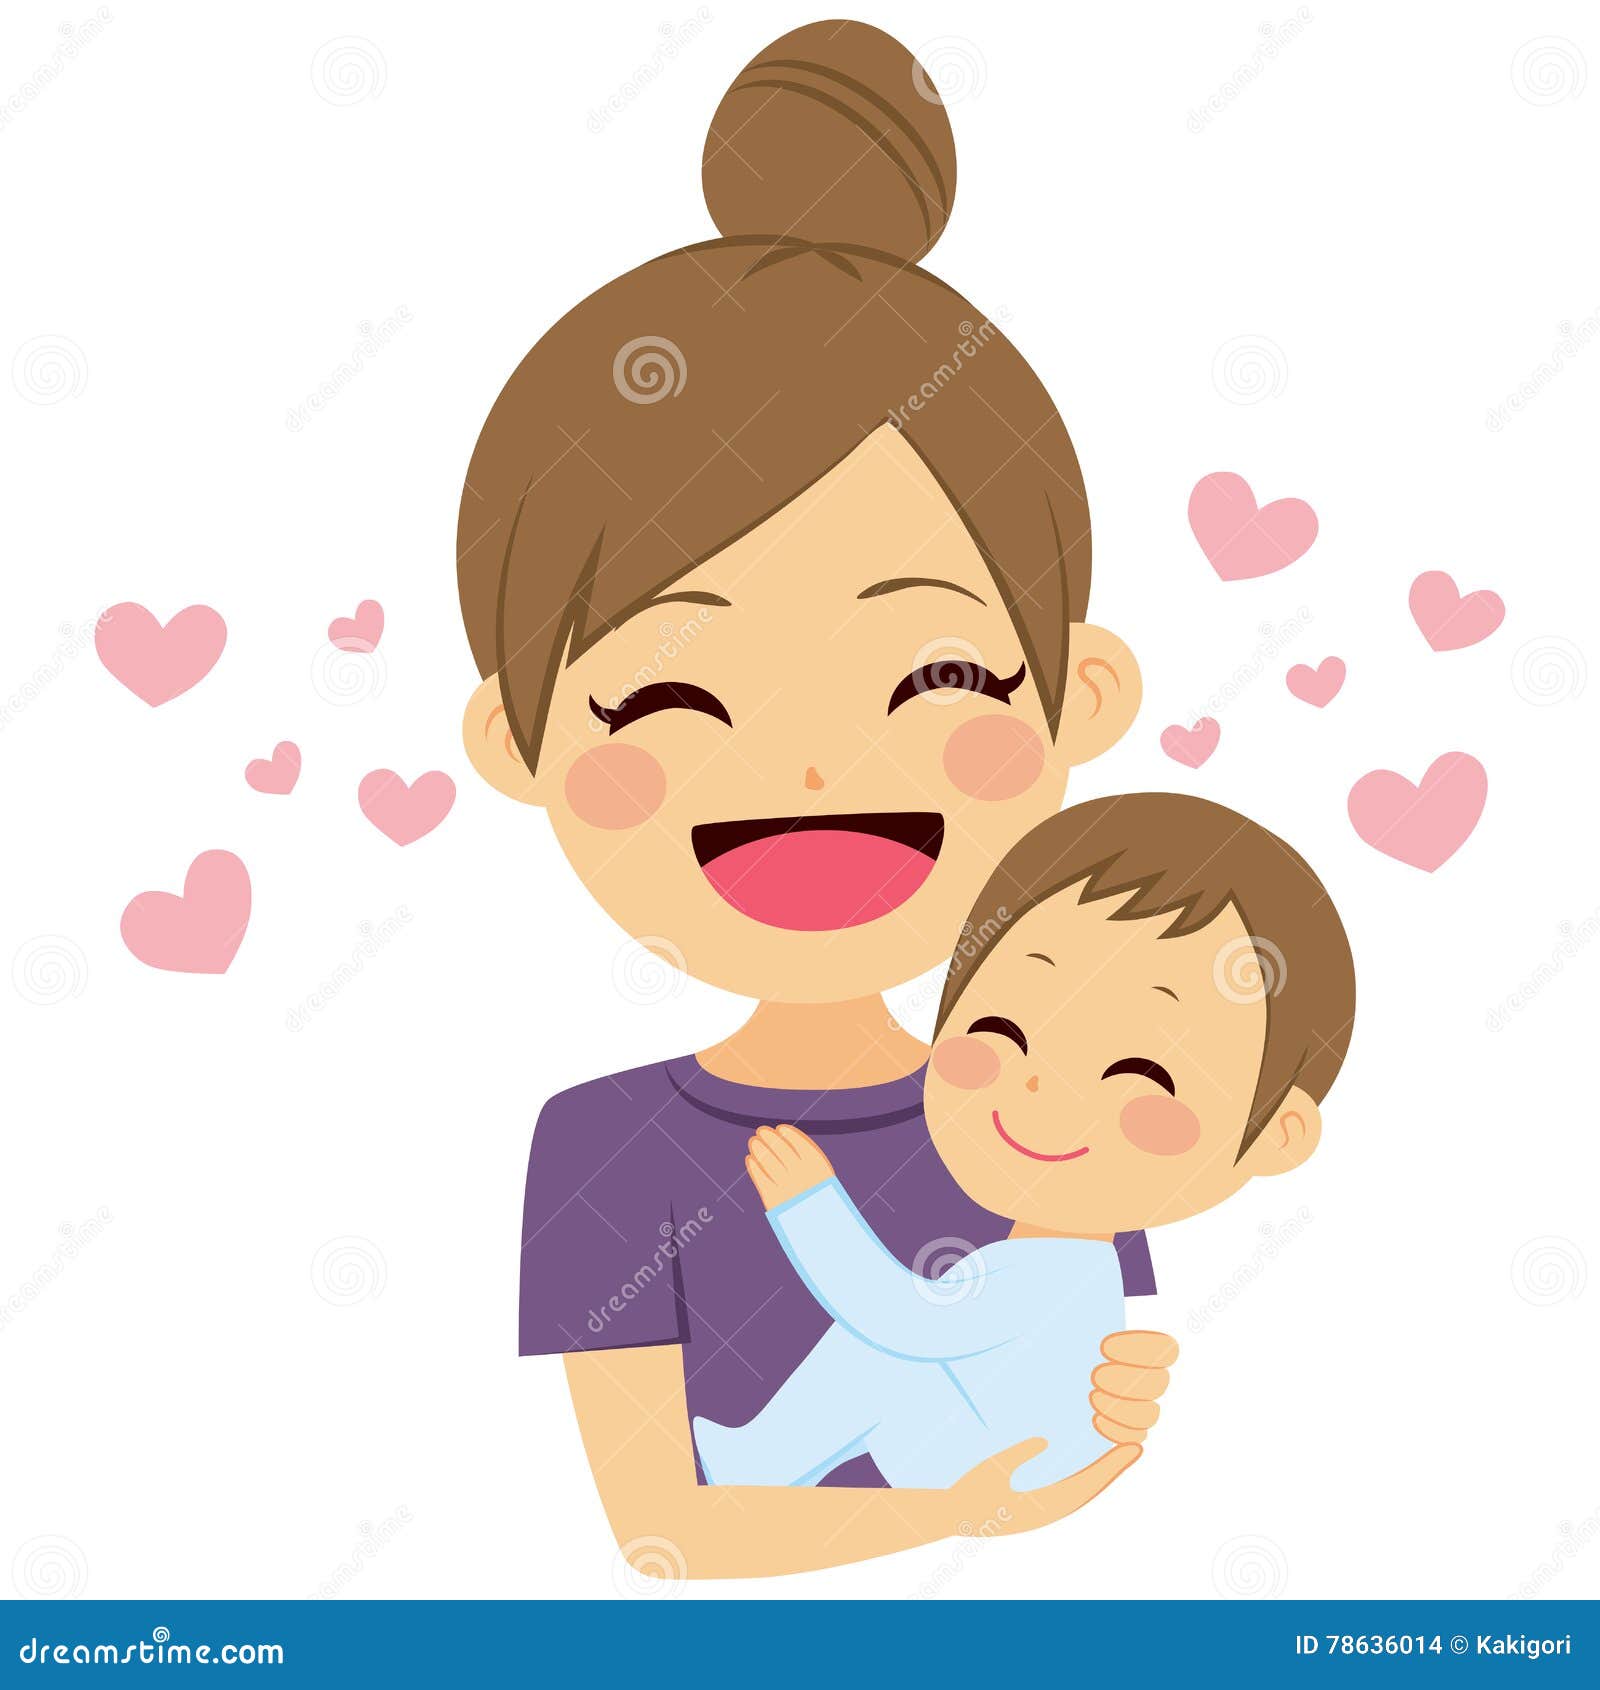 Caring Mother stock vector. Illustration of baby, people - 78636014